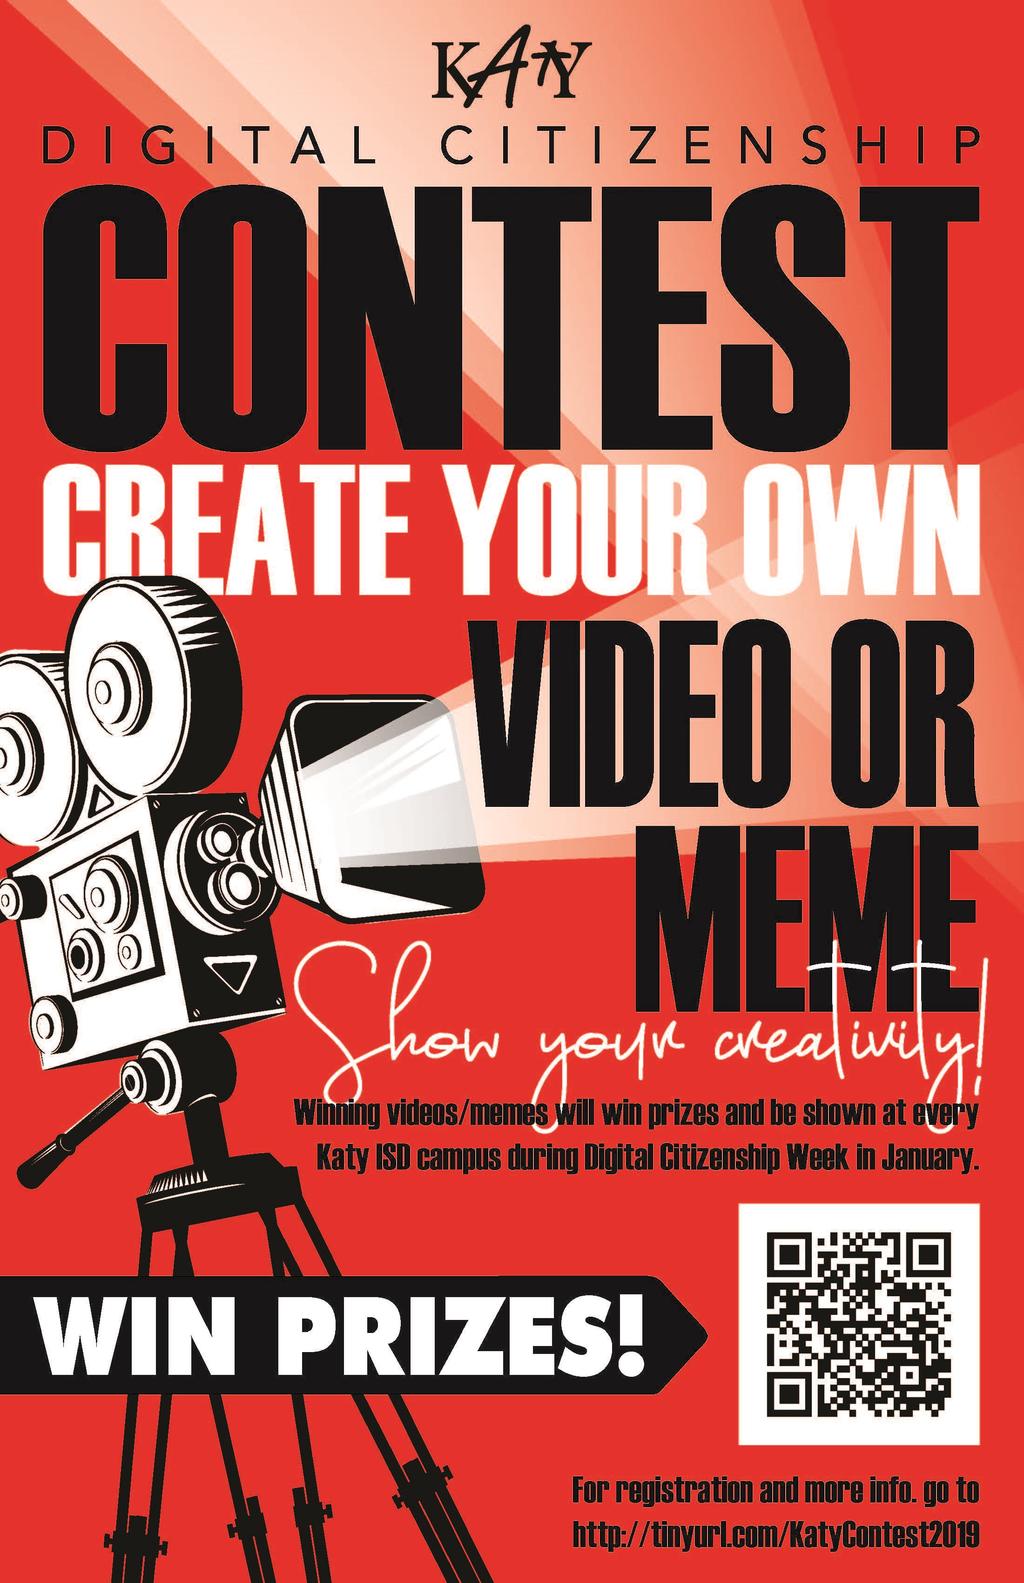 Page 2 Friday, January 18, is the deadline to submit your video or meme!